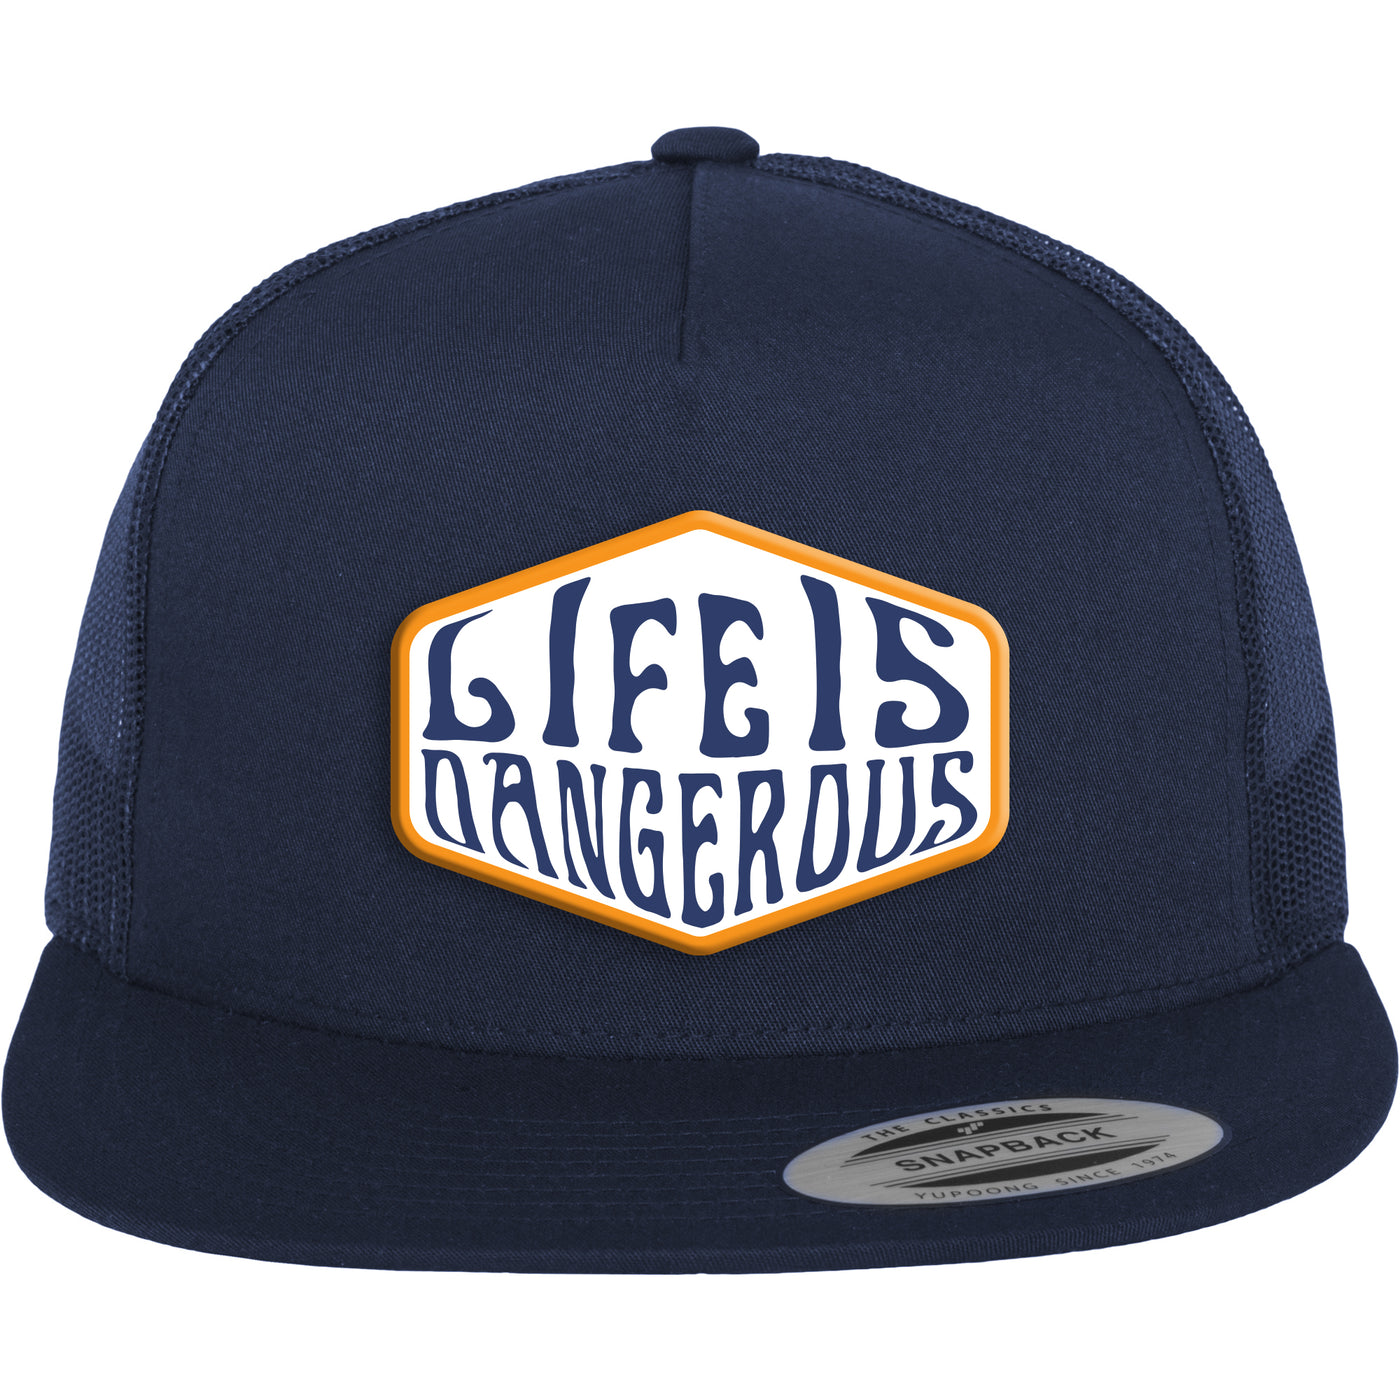 Life is Dangerous Embroidered Retro Hat